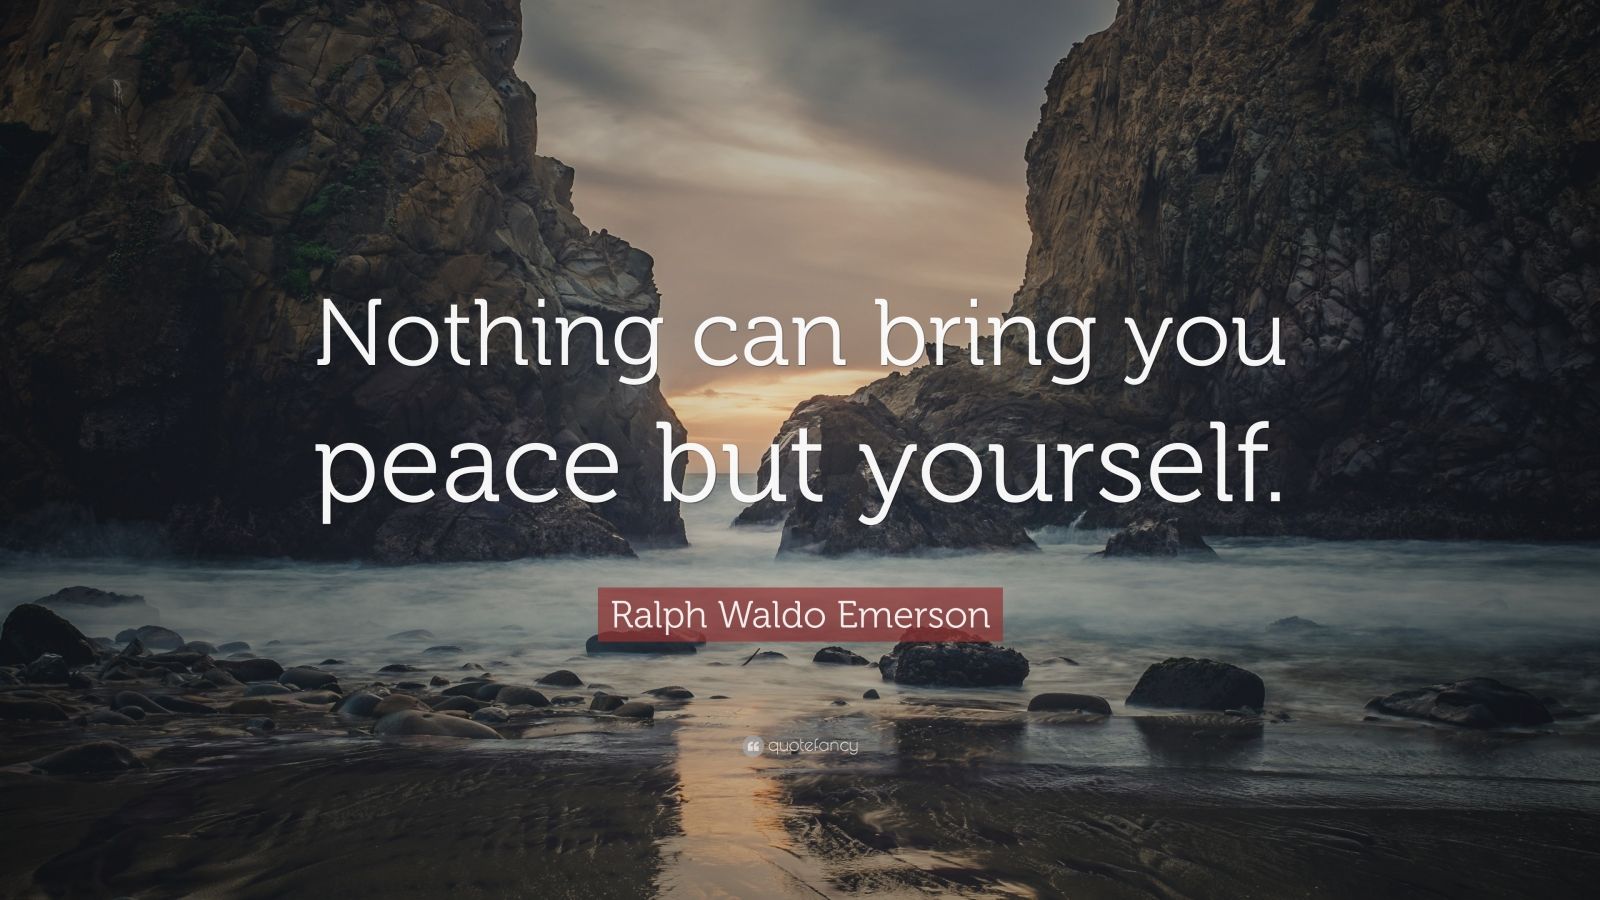 Ralph Waldo Emerson Quote: “Nothing can bring you peace but yourself ...